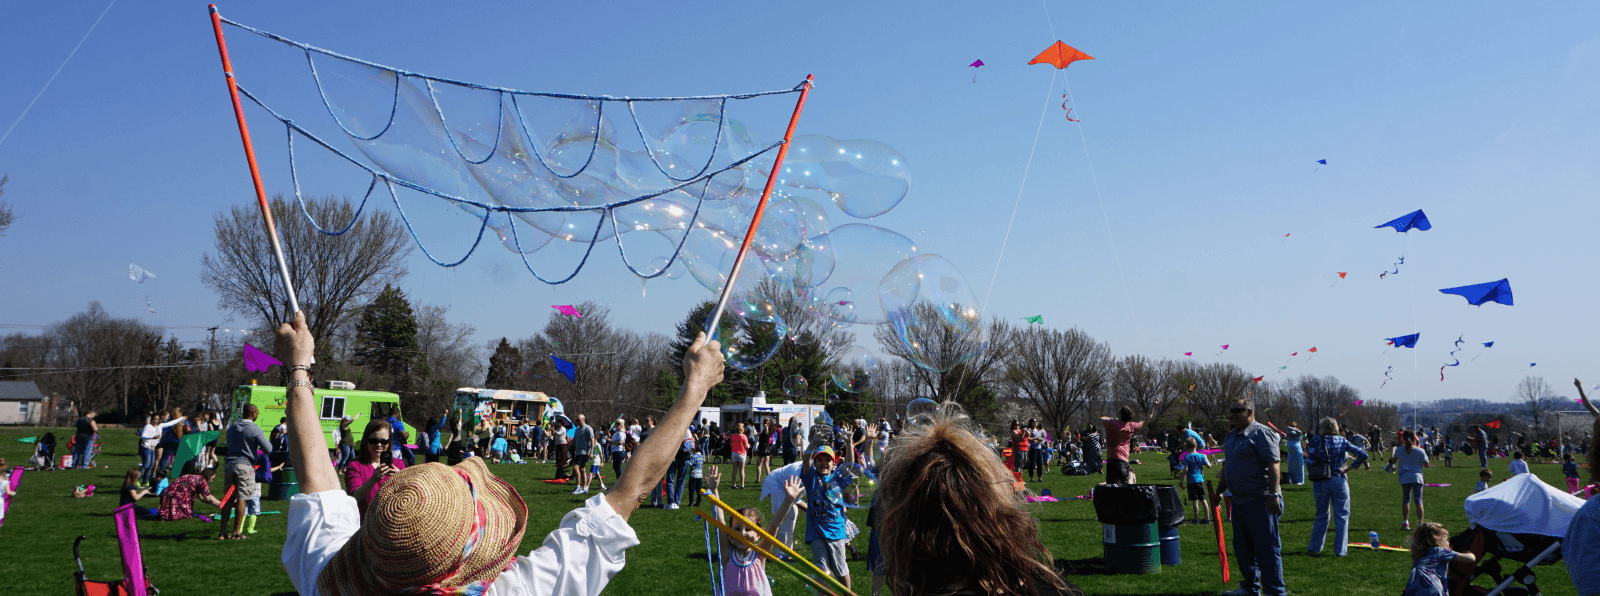 Person holding up bubble maker in a crowd of people flying kites in a field